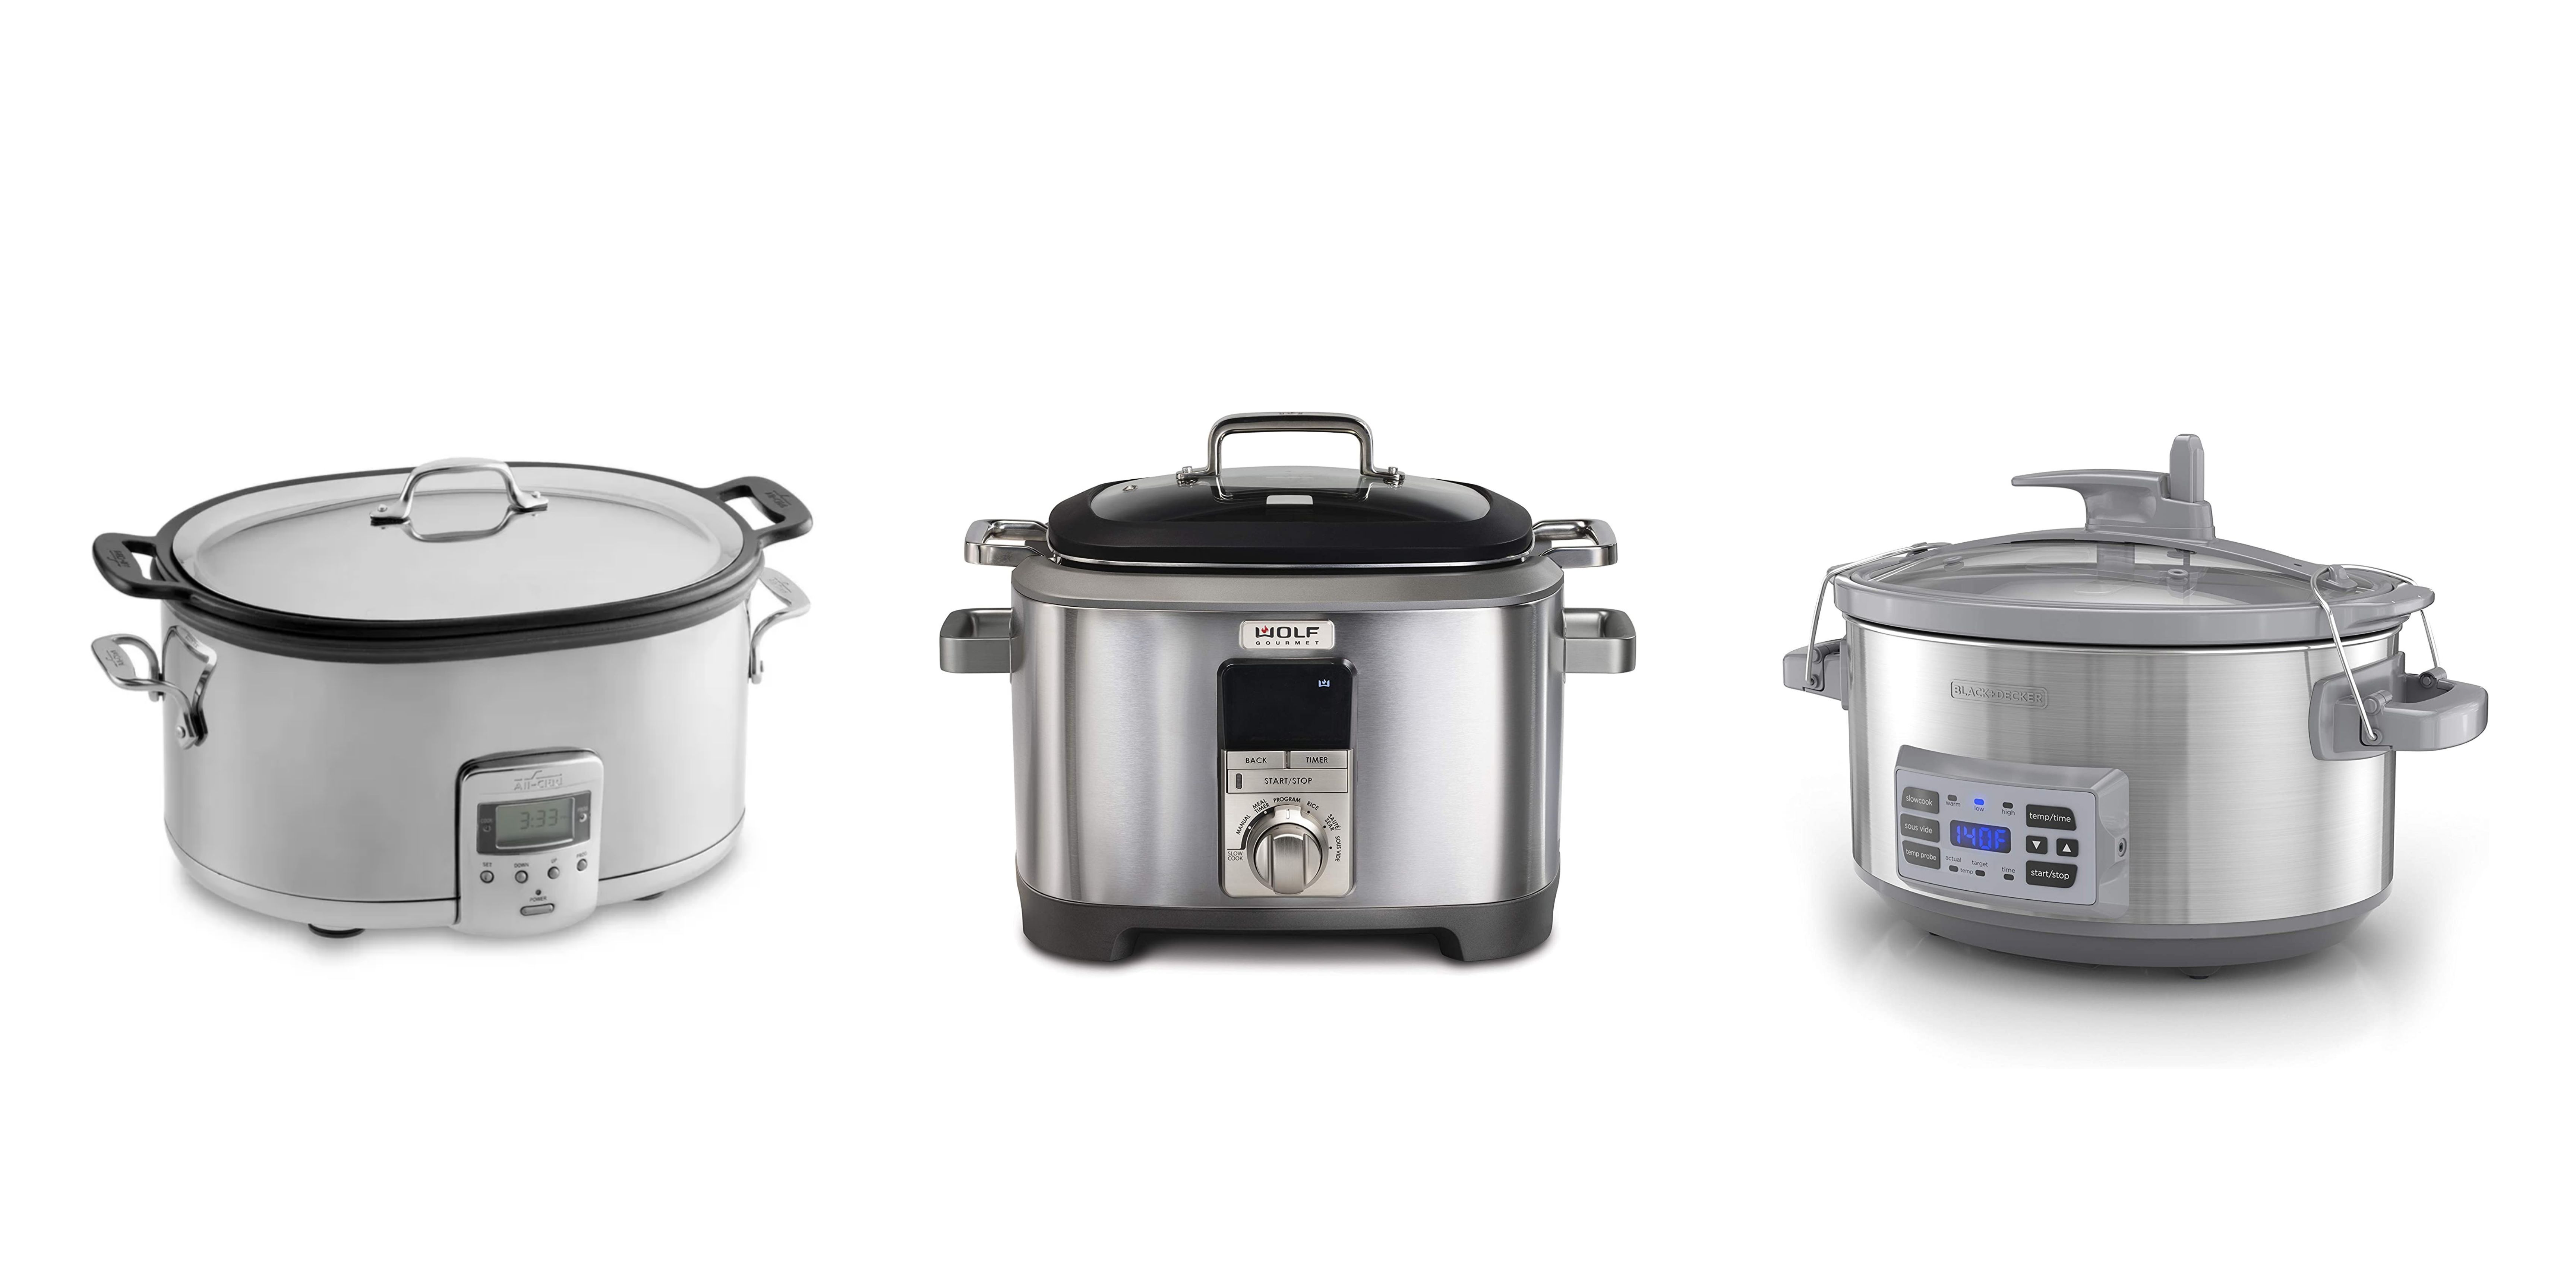 5 best slow cookers, according to experts